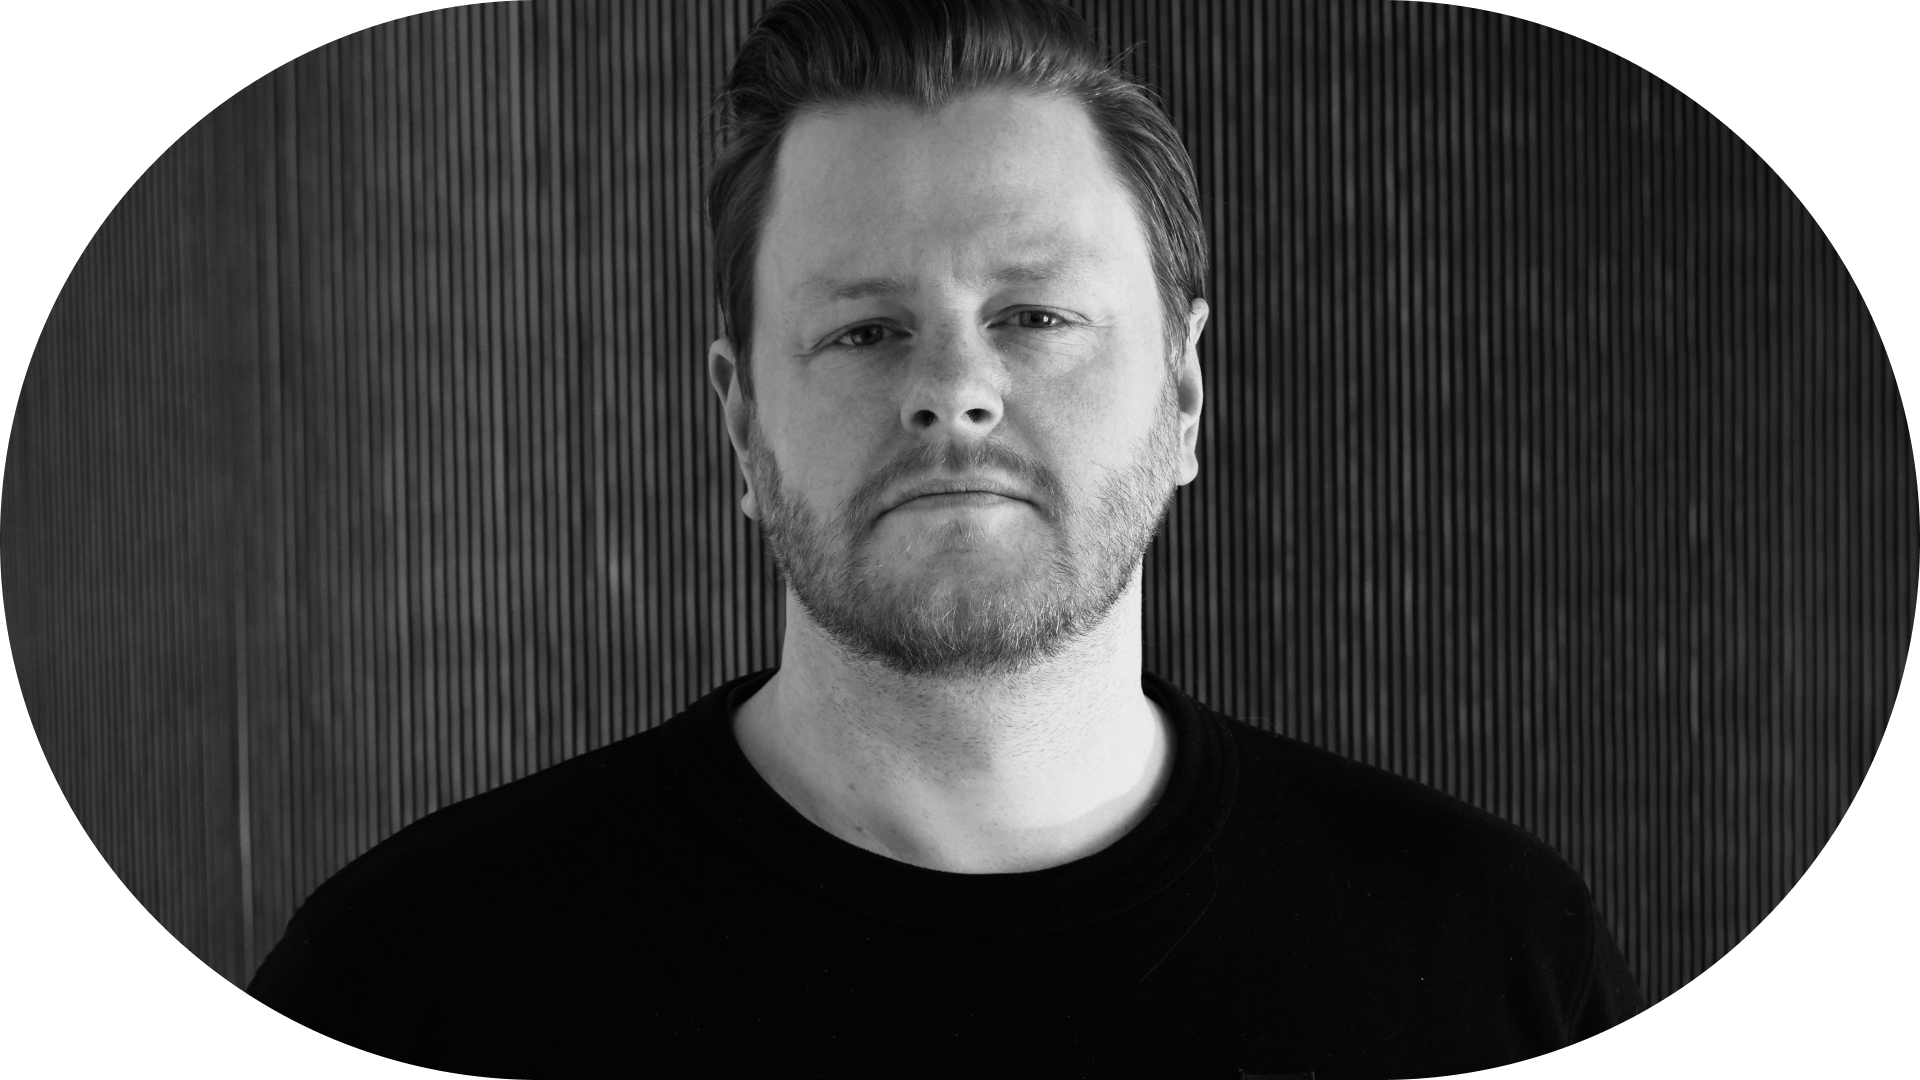 Interview with Nick Christiansen, Creative Director and Founding Partner, OKTO